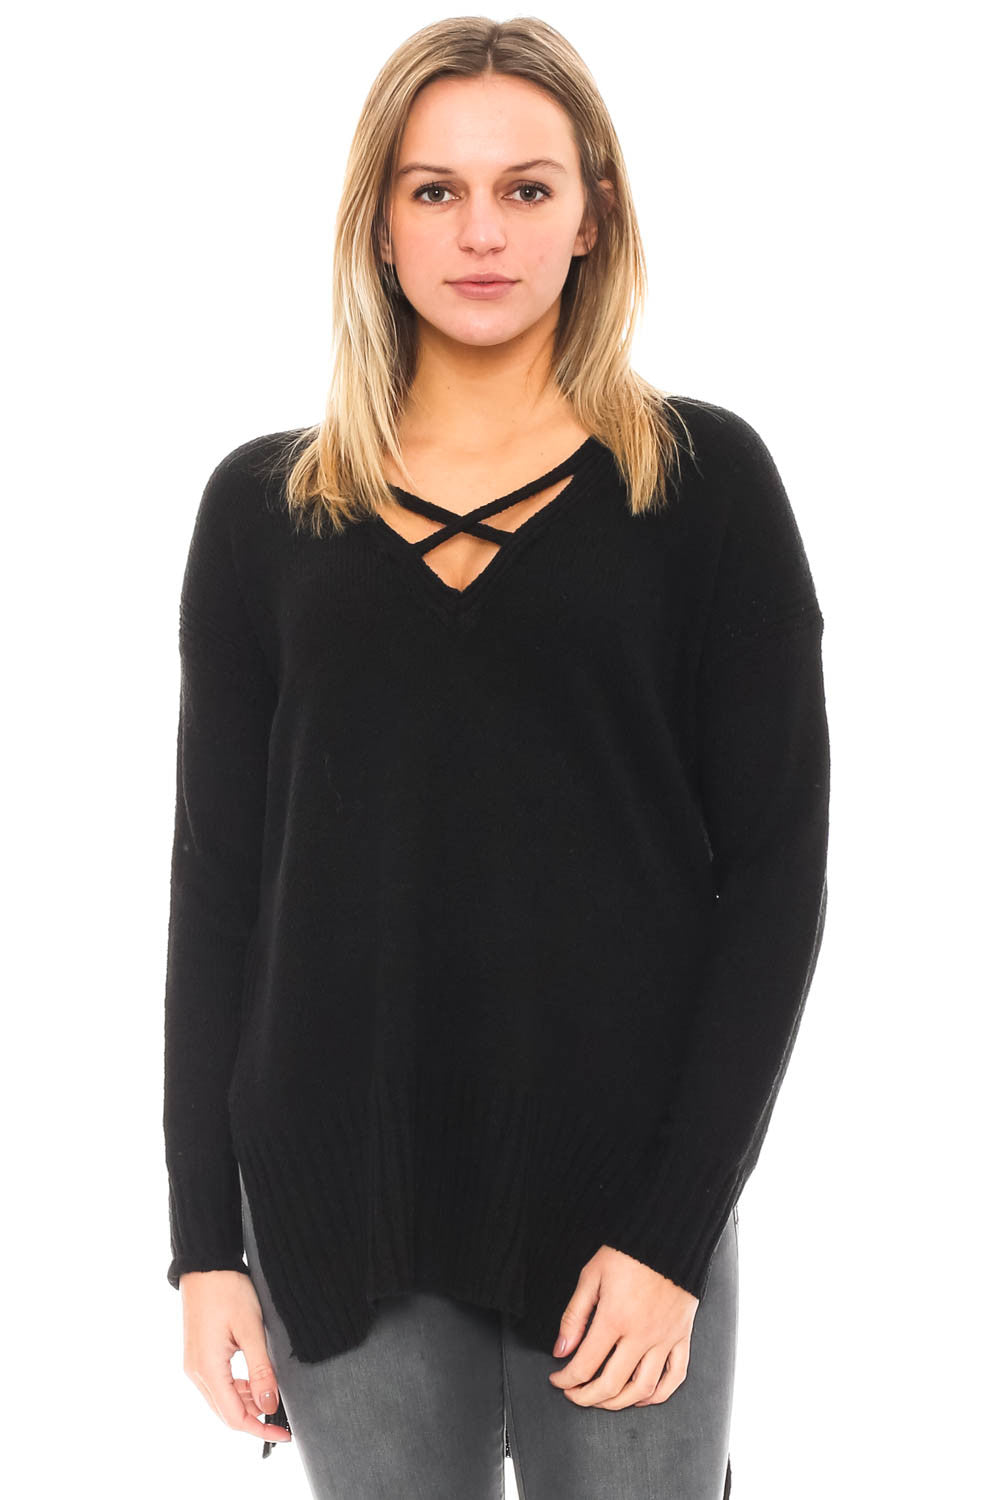 Sweater - High Low Criss-Cross Front Knit Top by Lush